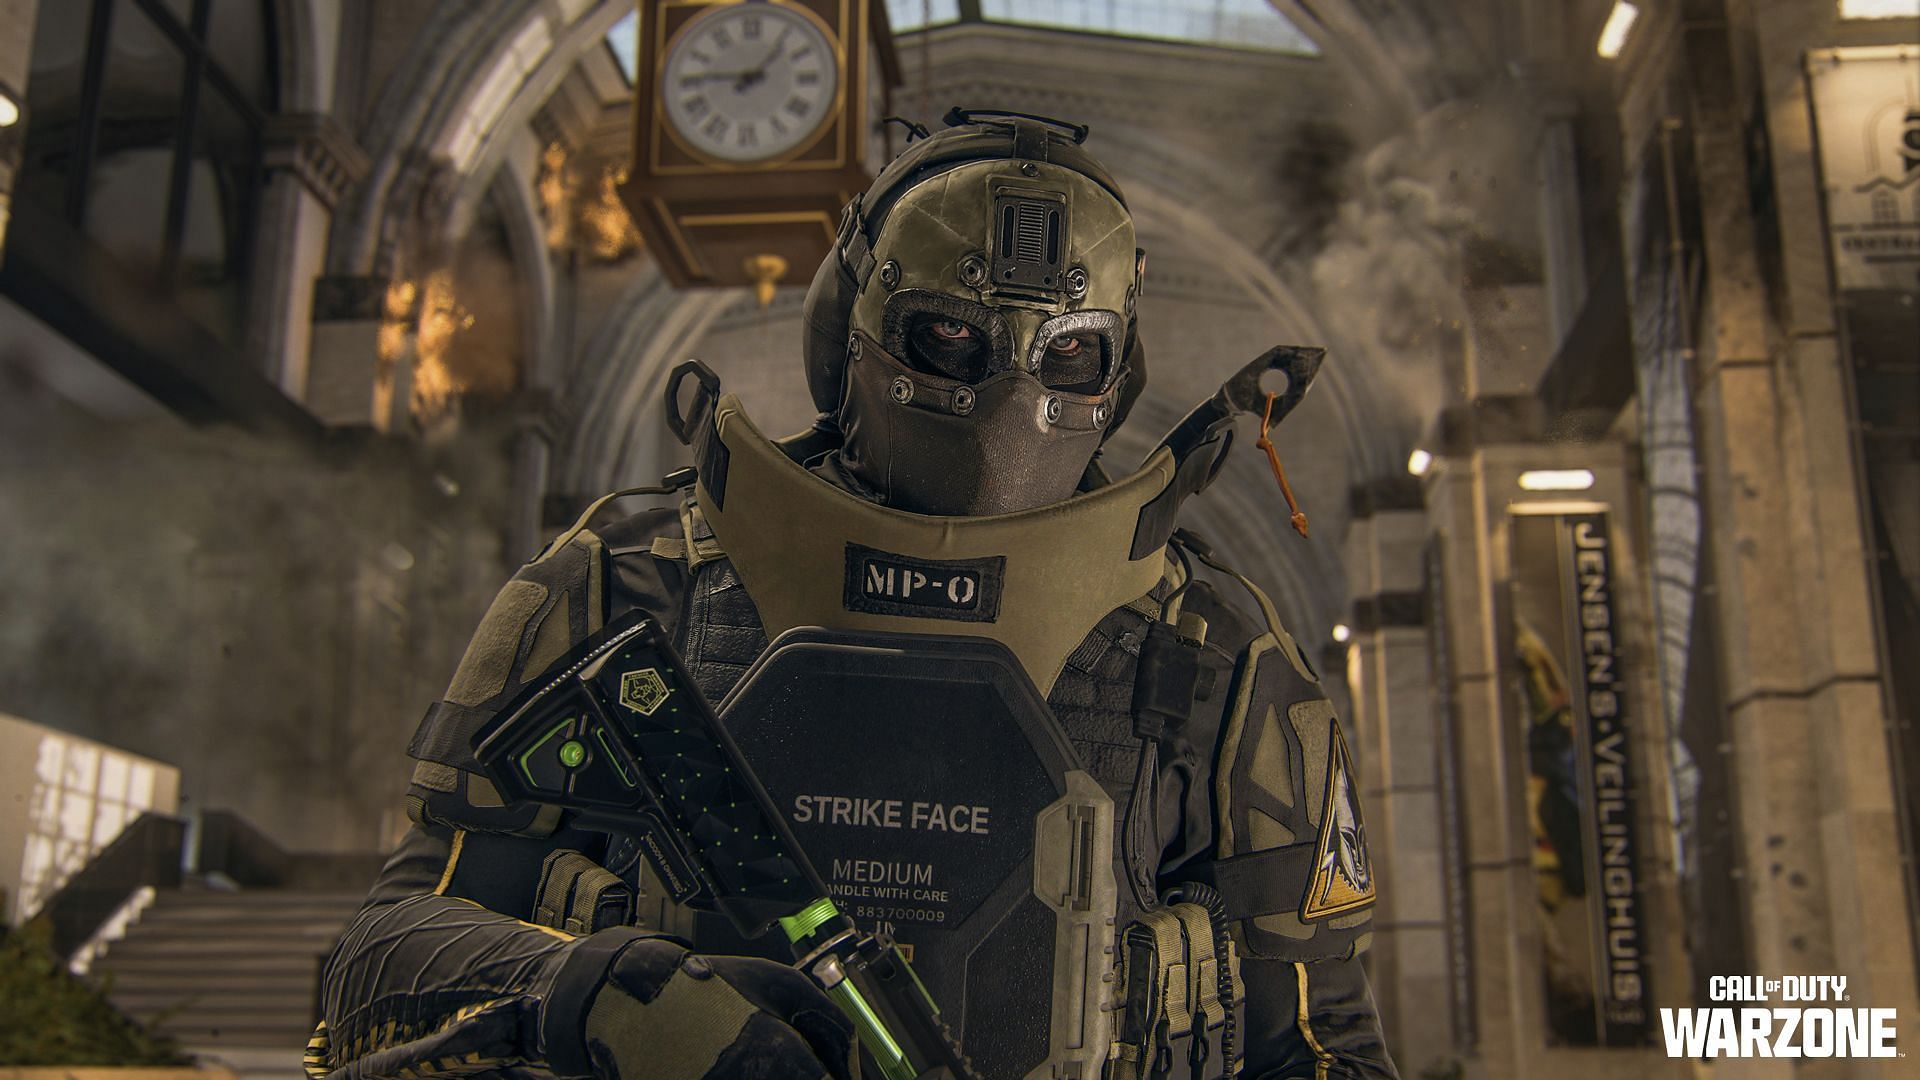 New Armor Plate Carriers in Warzone 2 discussed (Image via Activision)